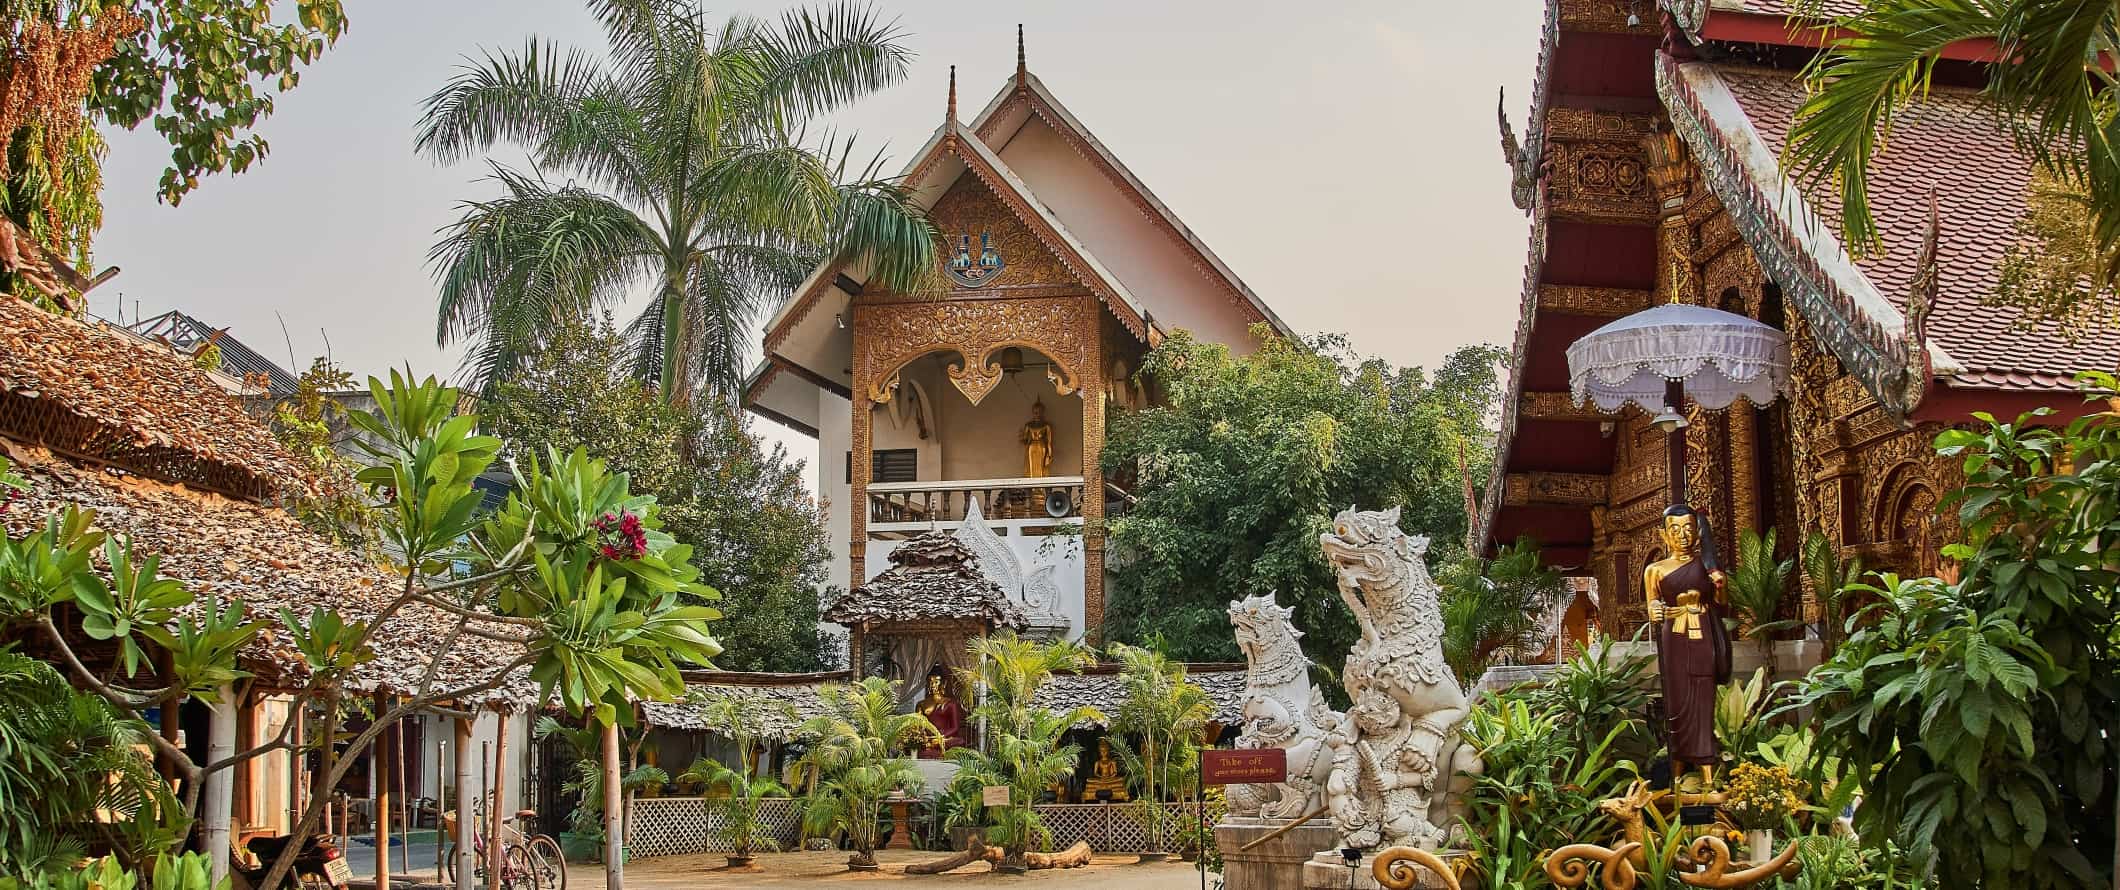 One of Chiang Mai, Thailand’s many stunning historic Buddhist temples